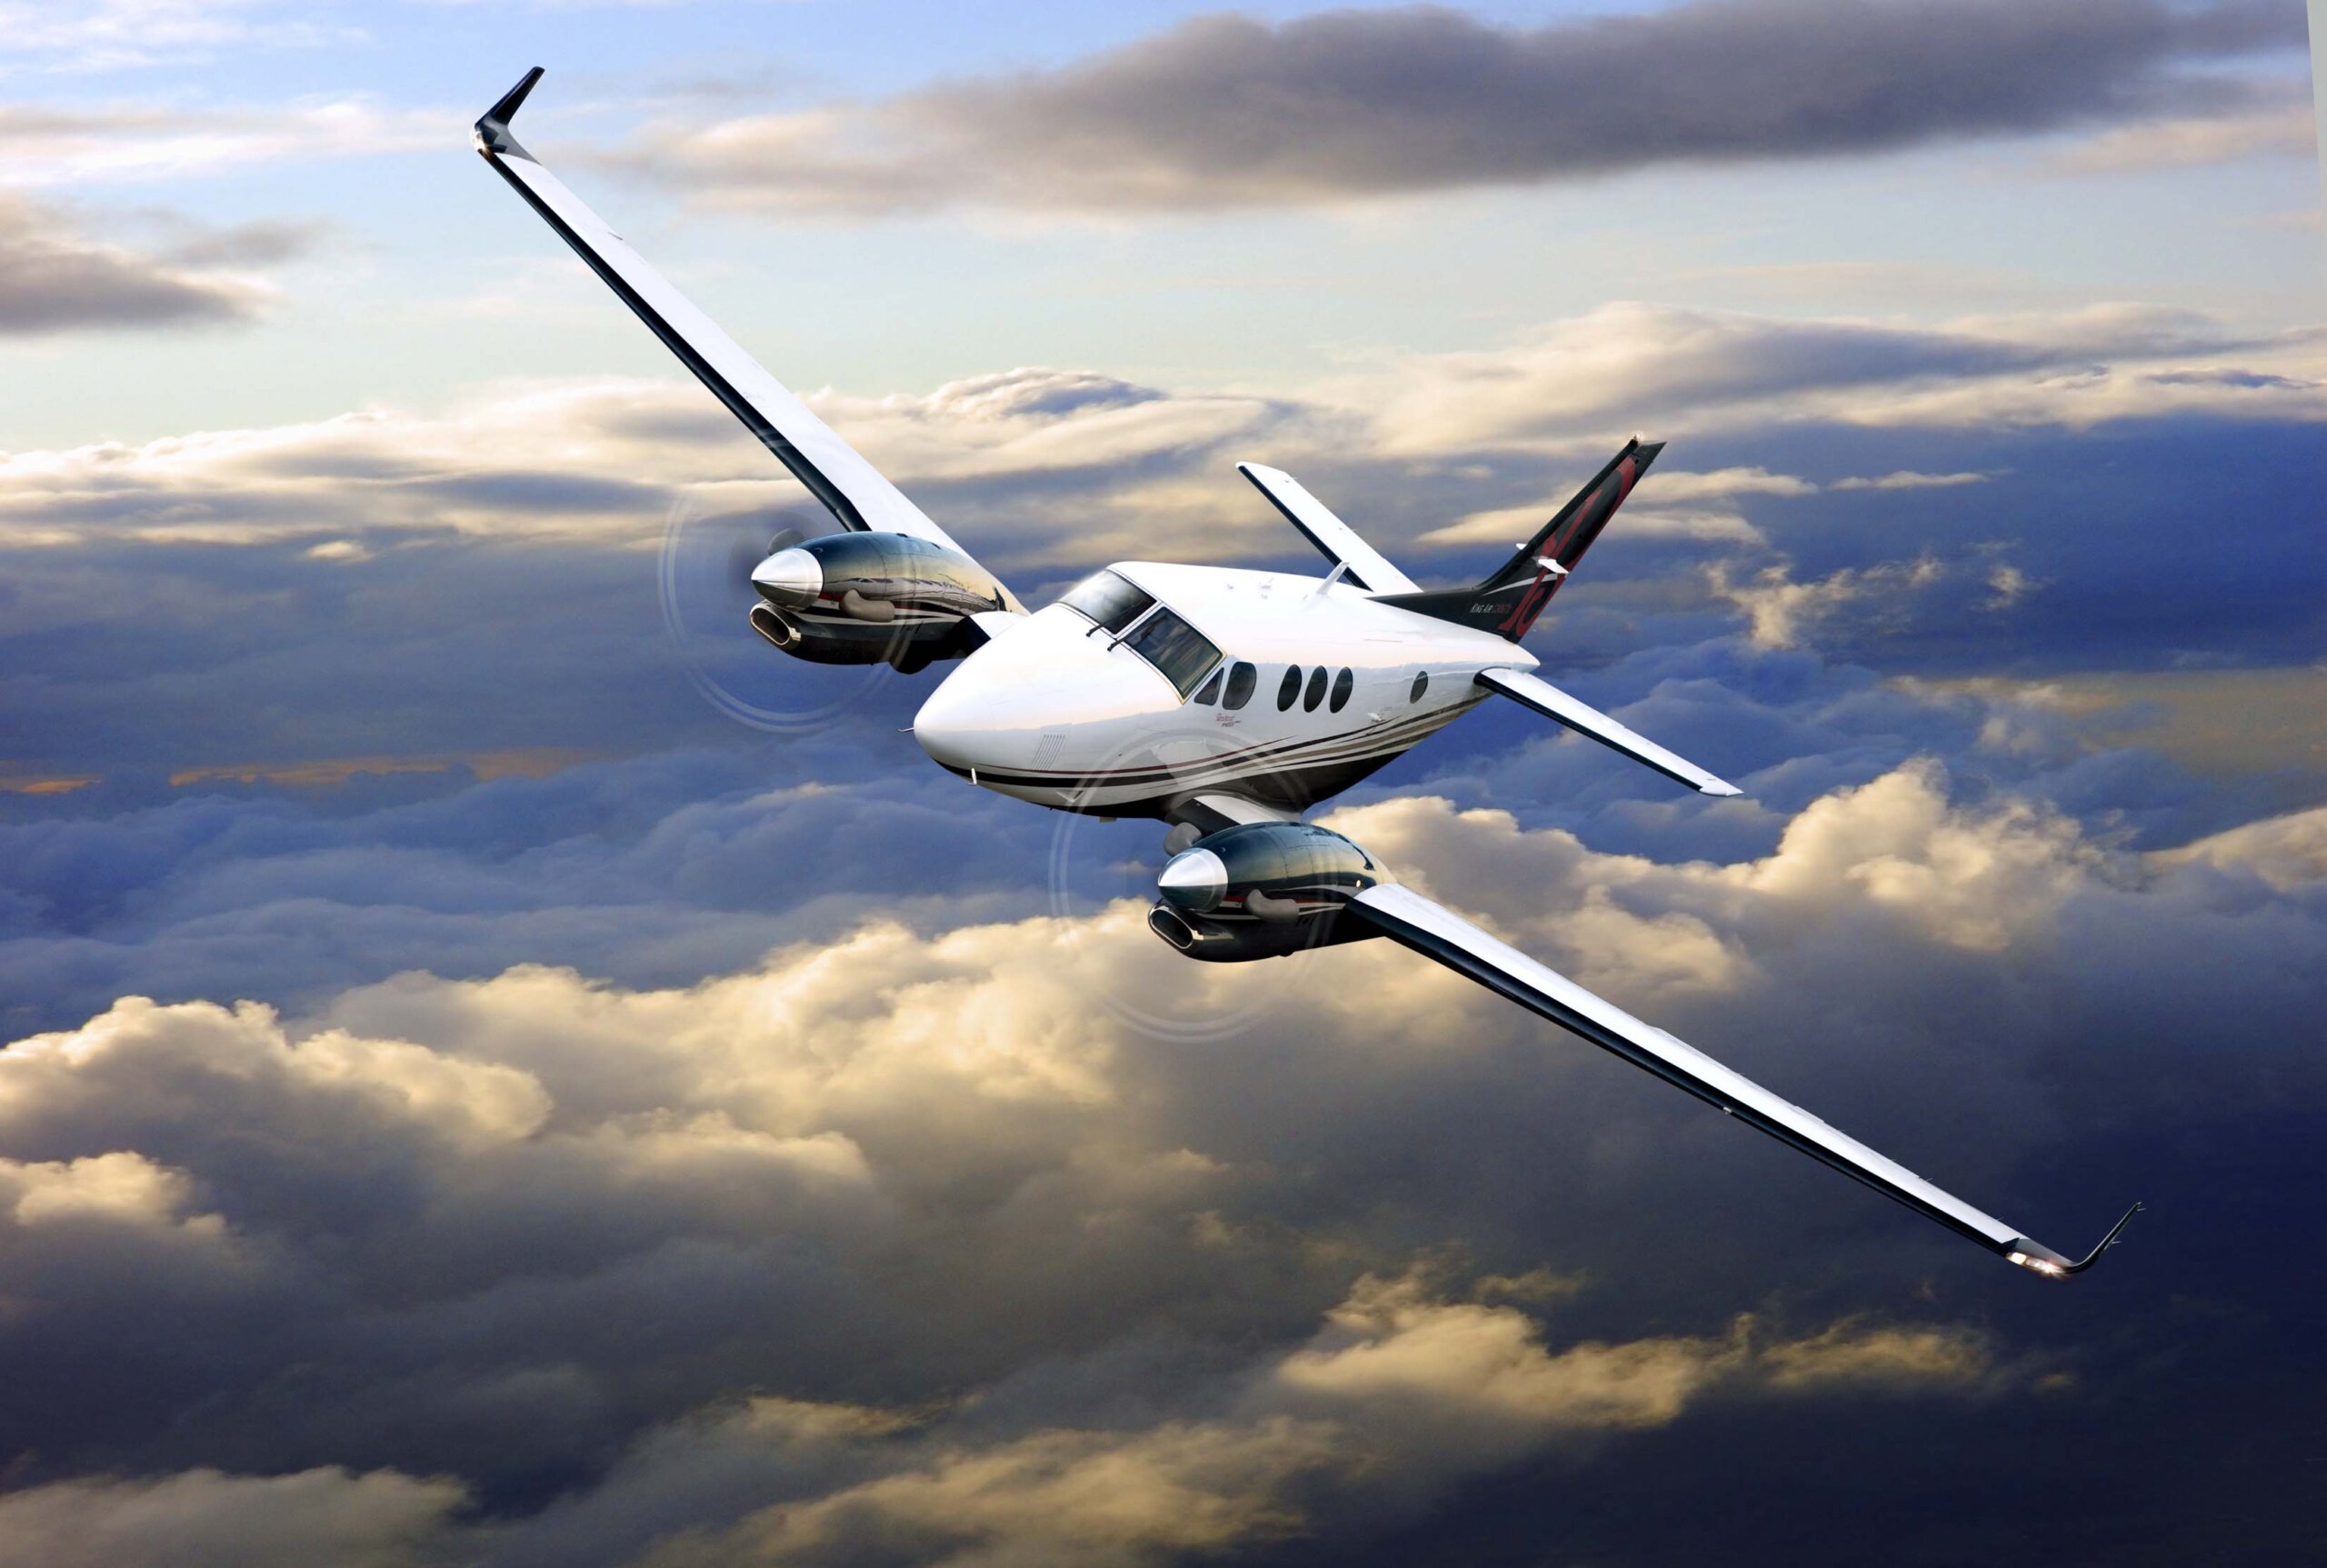 King Air C90GTx flying front